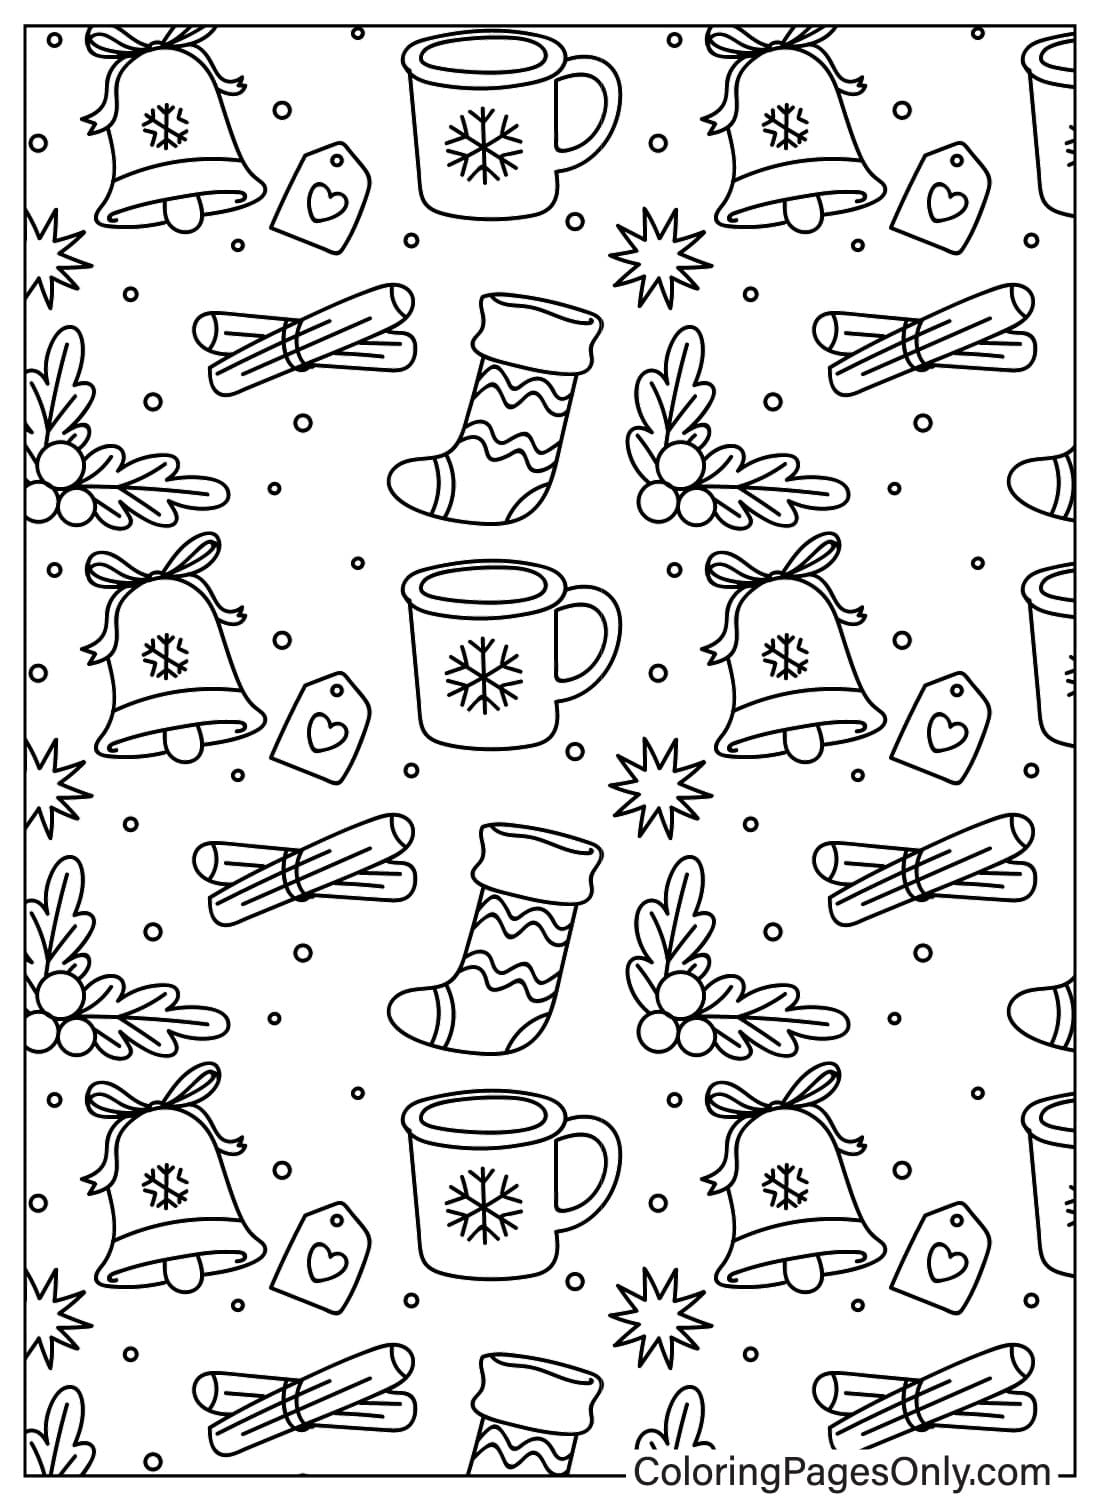 Christmas Pattern Coloring Page PDF - Free Printable Coloring Pages